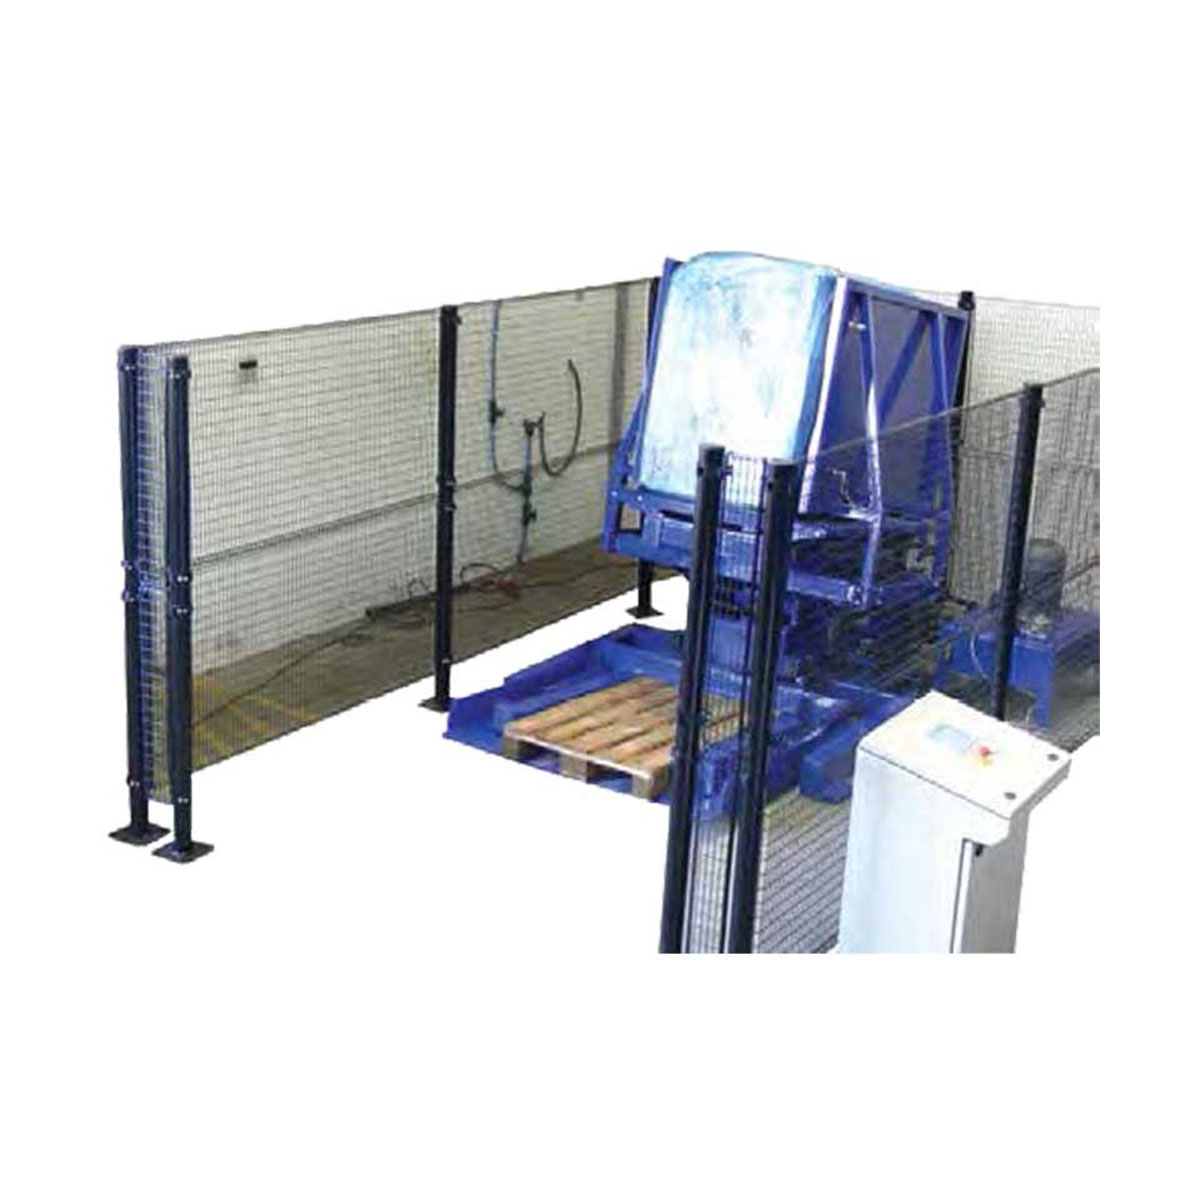 Buy Pallet Changer Non-Inversion in Pallet Inverter/Changer from Premier available at Astrolift NZ